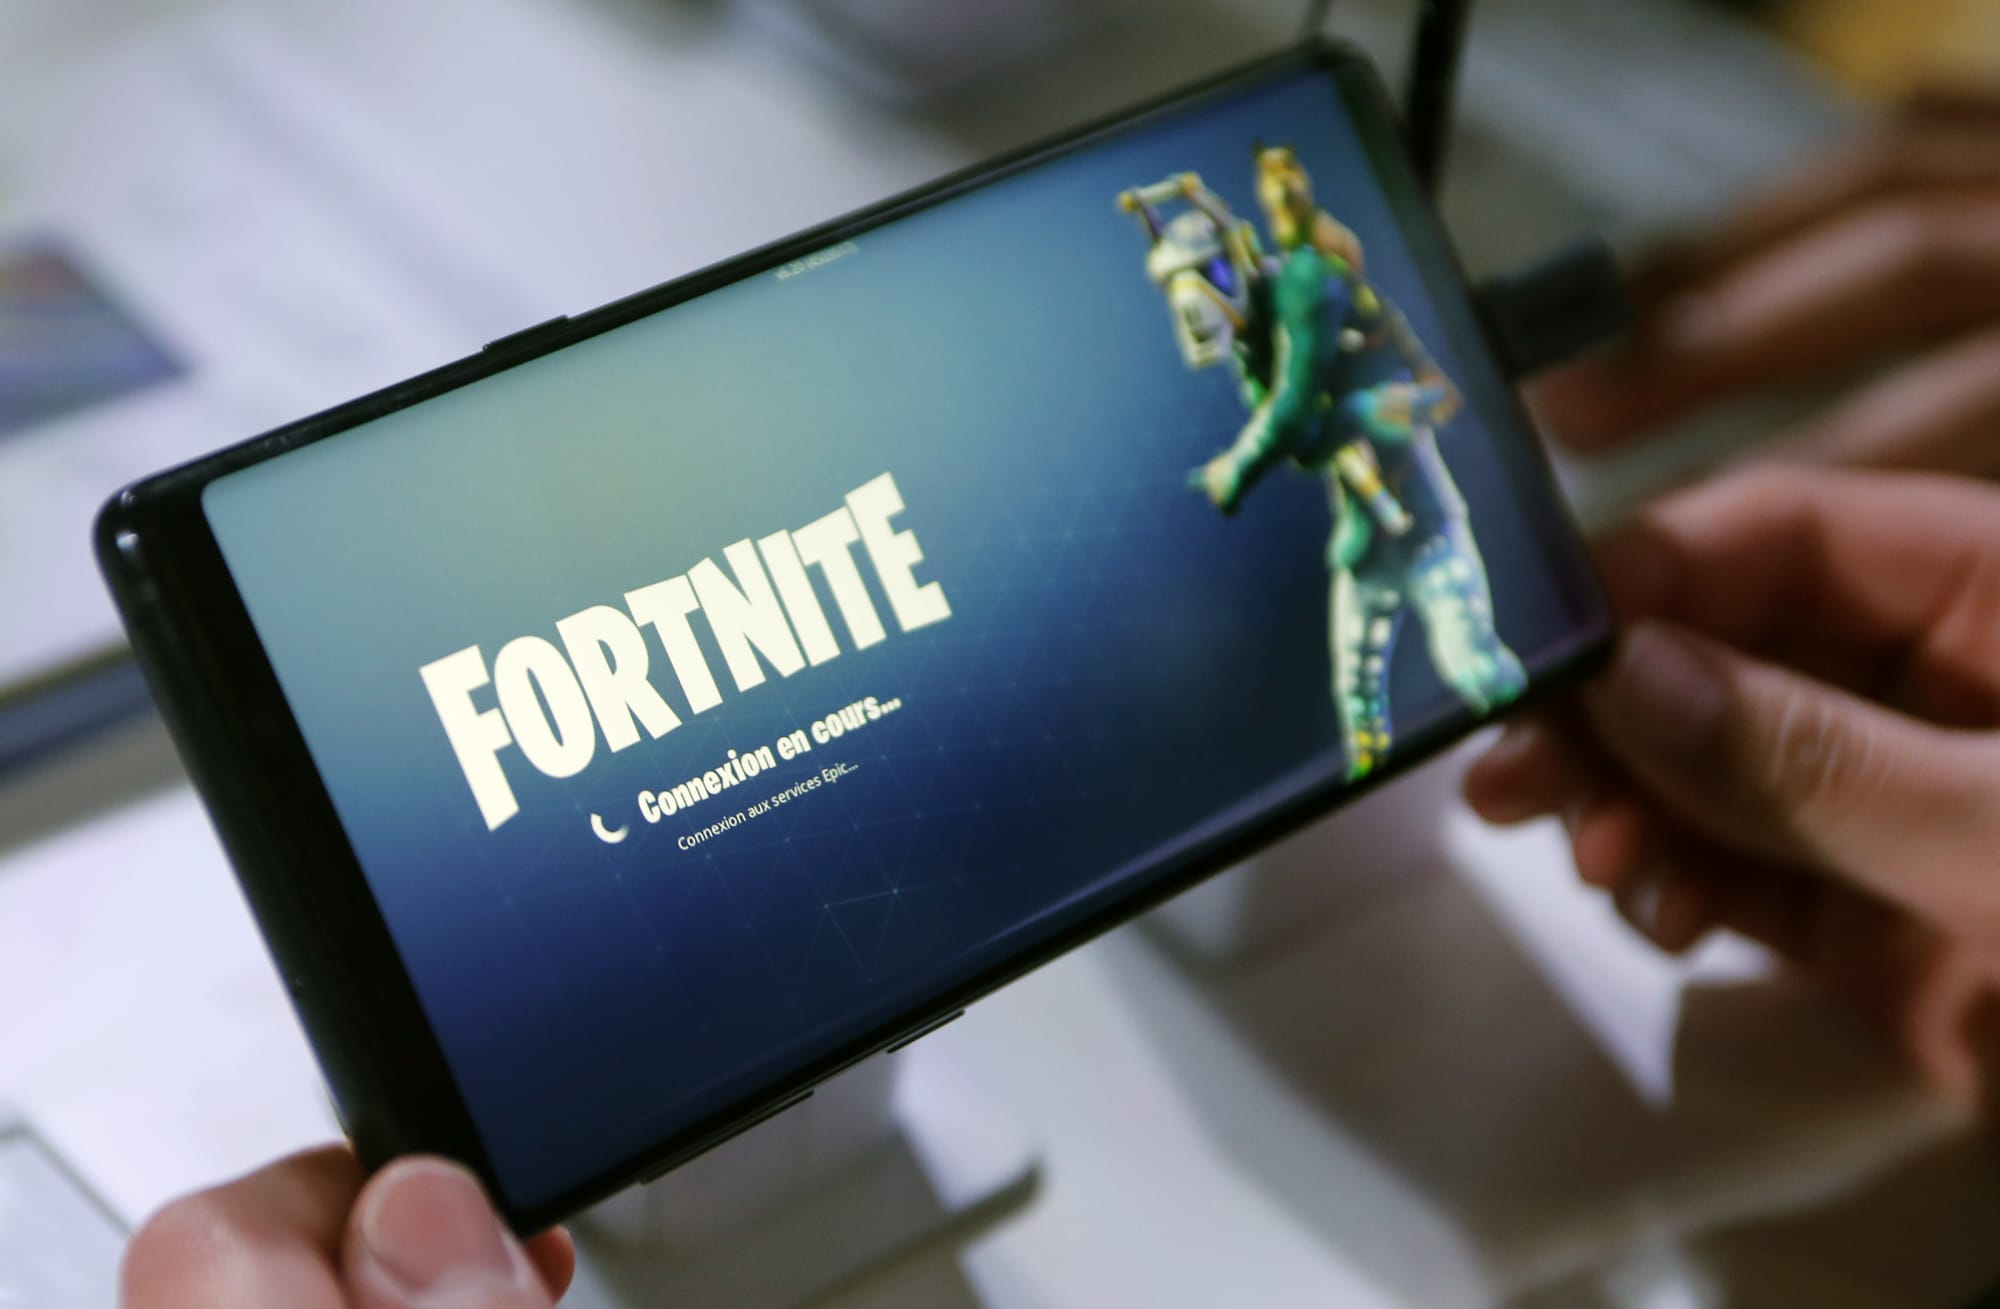 how to play fortnite without downloading the app